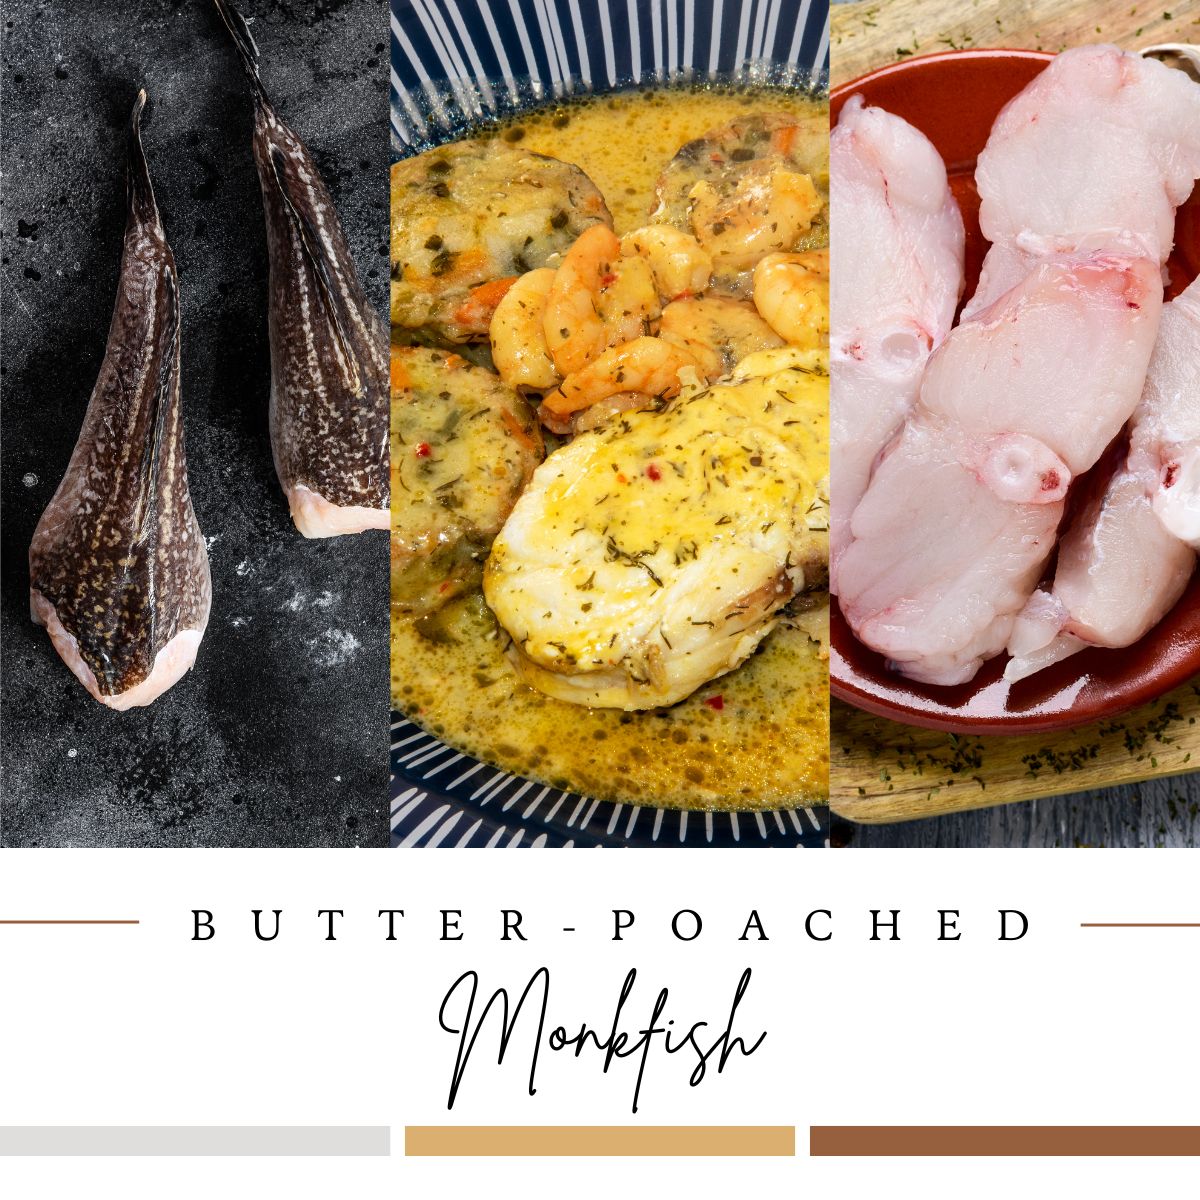 graphic image of three types of monkfish for butter-poached monkfish recipe